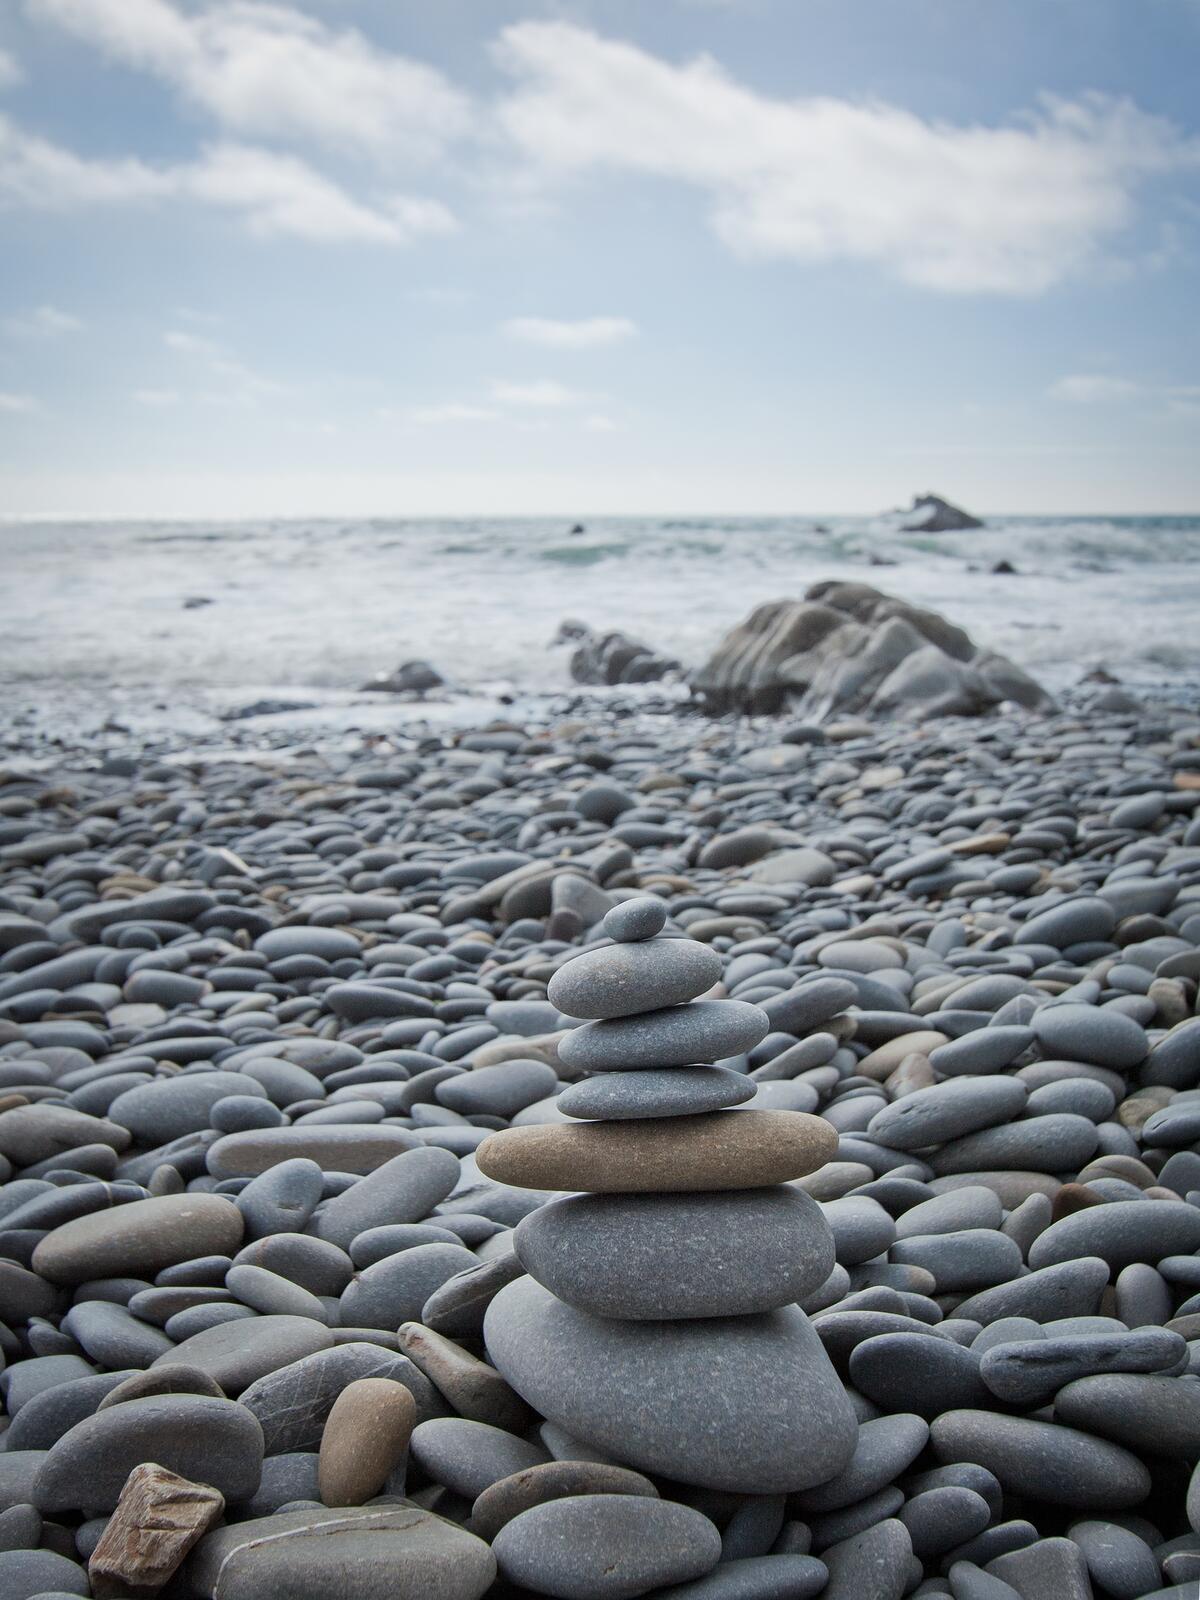 Pebbles stacked on top of each other on the seashore